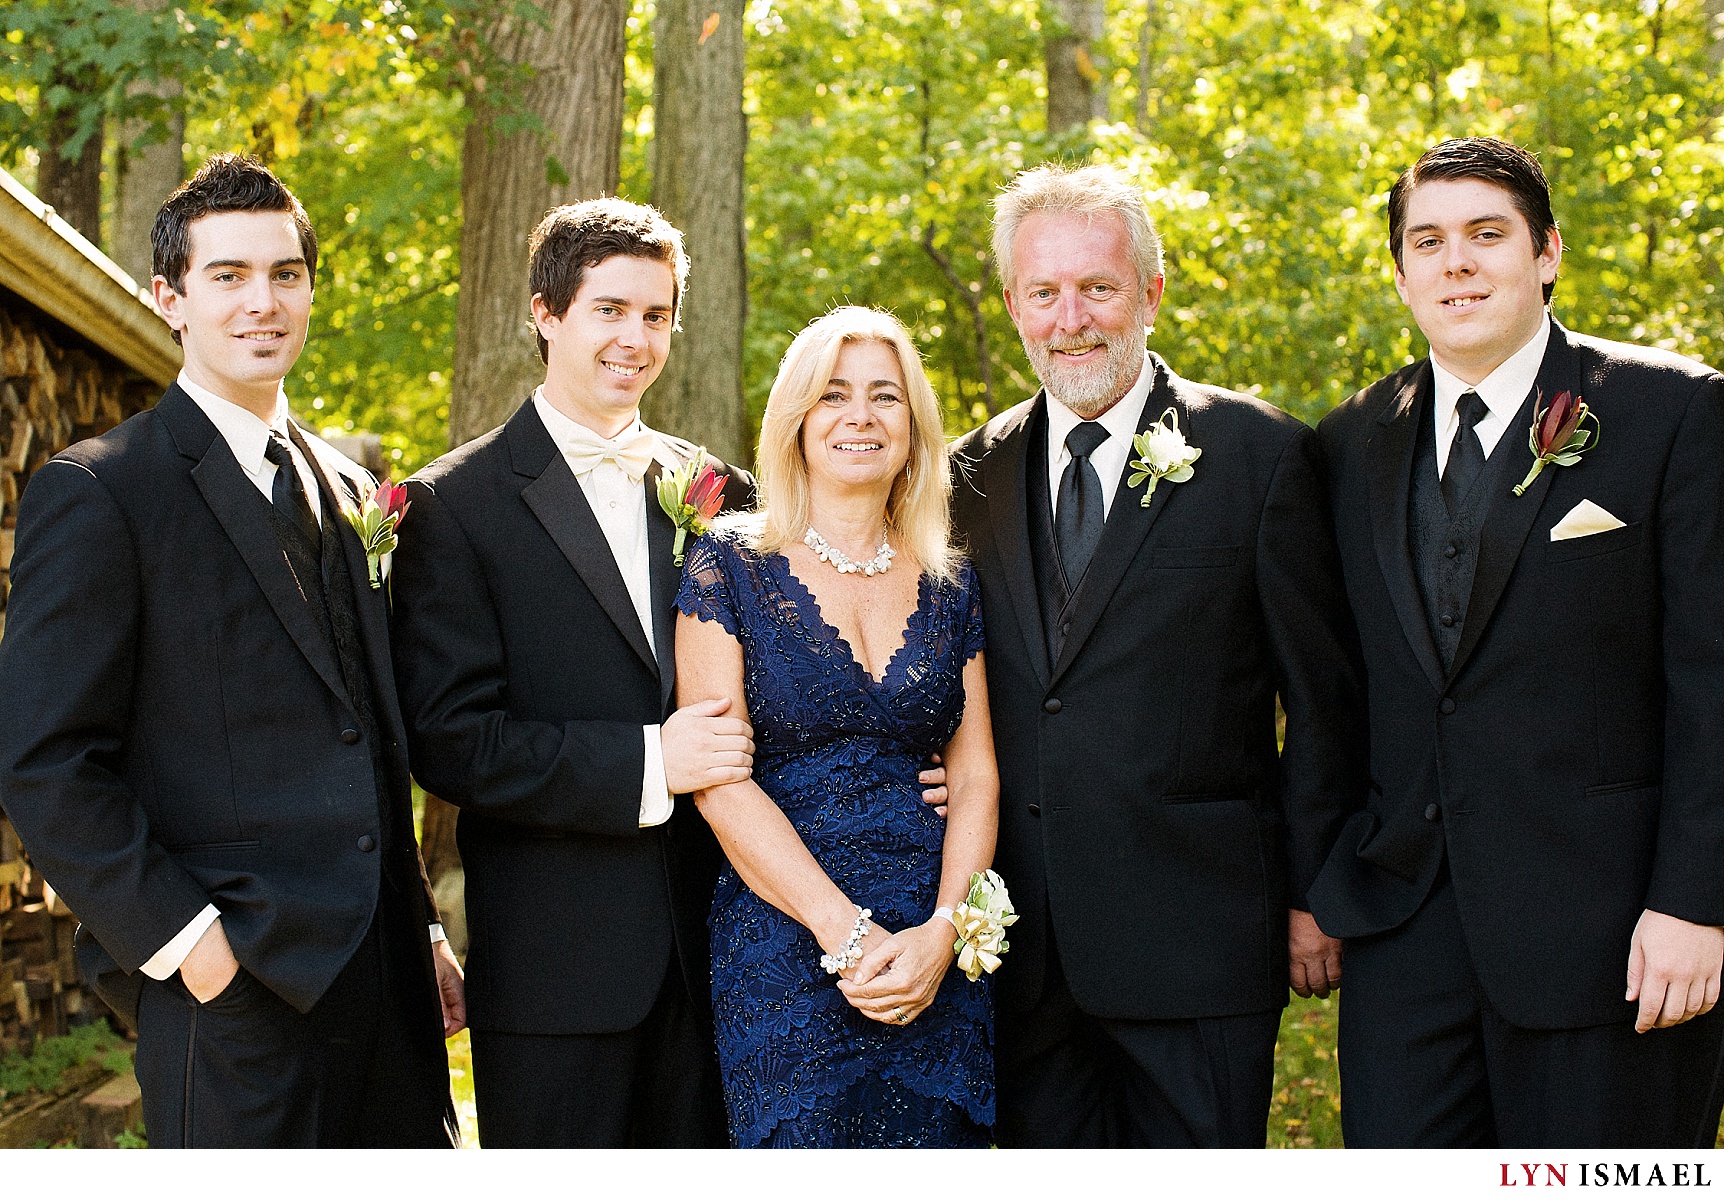 Family portrait of the groom and his family